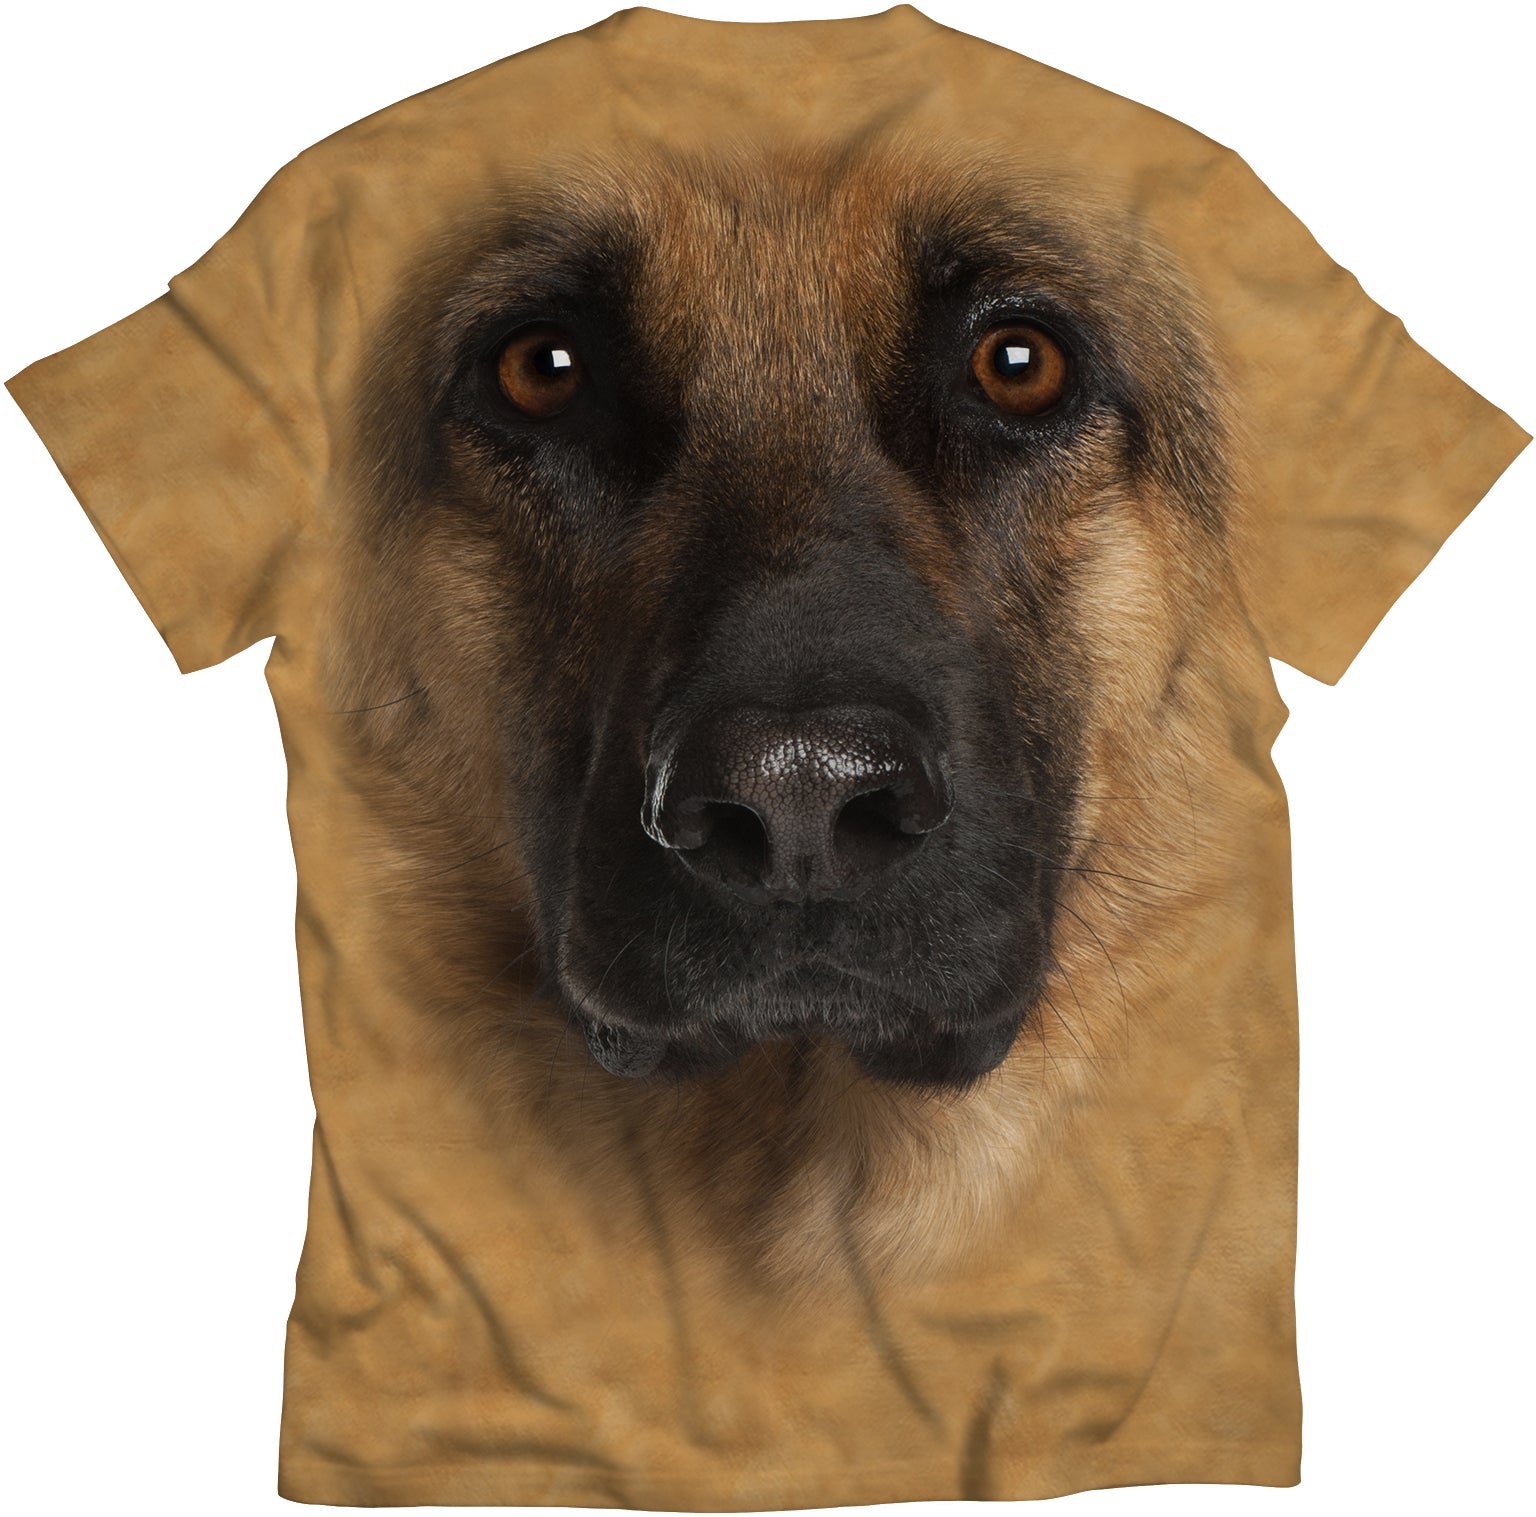 standout german shepherd t shirt all over print dog face t shirt redwolf souled store bewakoof dog show in india the kennel club of india dog t shirts for humans funny dog shirts dog graphic t shirts dogteeshop dog lover t shirt dog clothes online dog print t shirts india pet lover t shirt 3d animal print t shirts pet supply the mountain t shirt German Shepherd t shirt